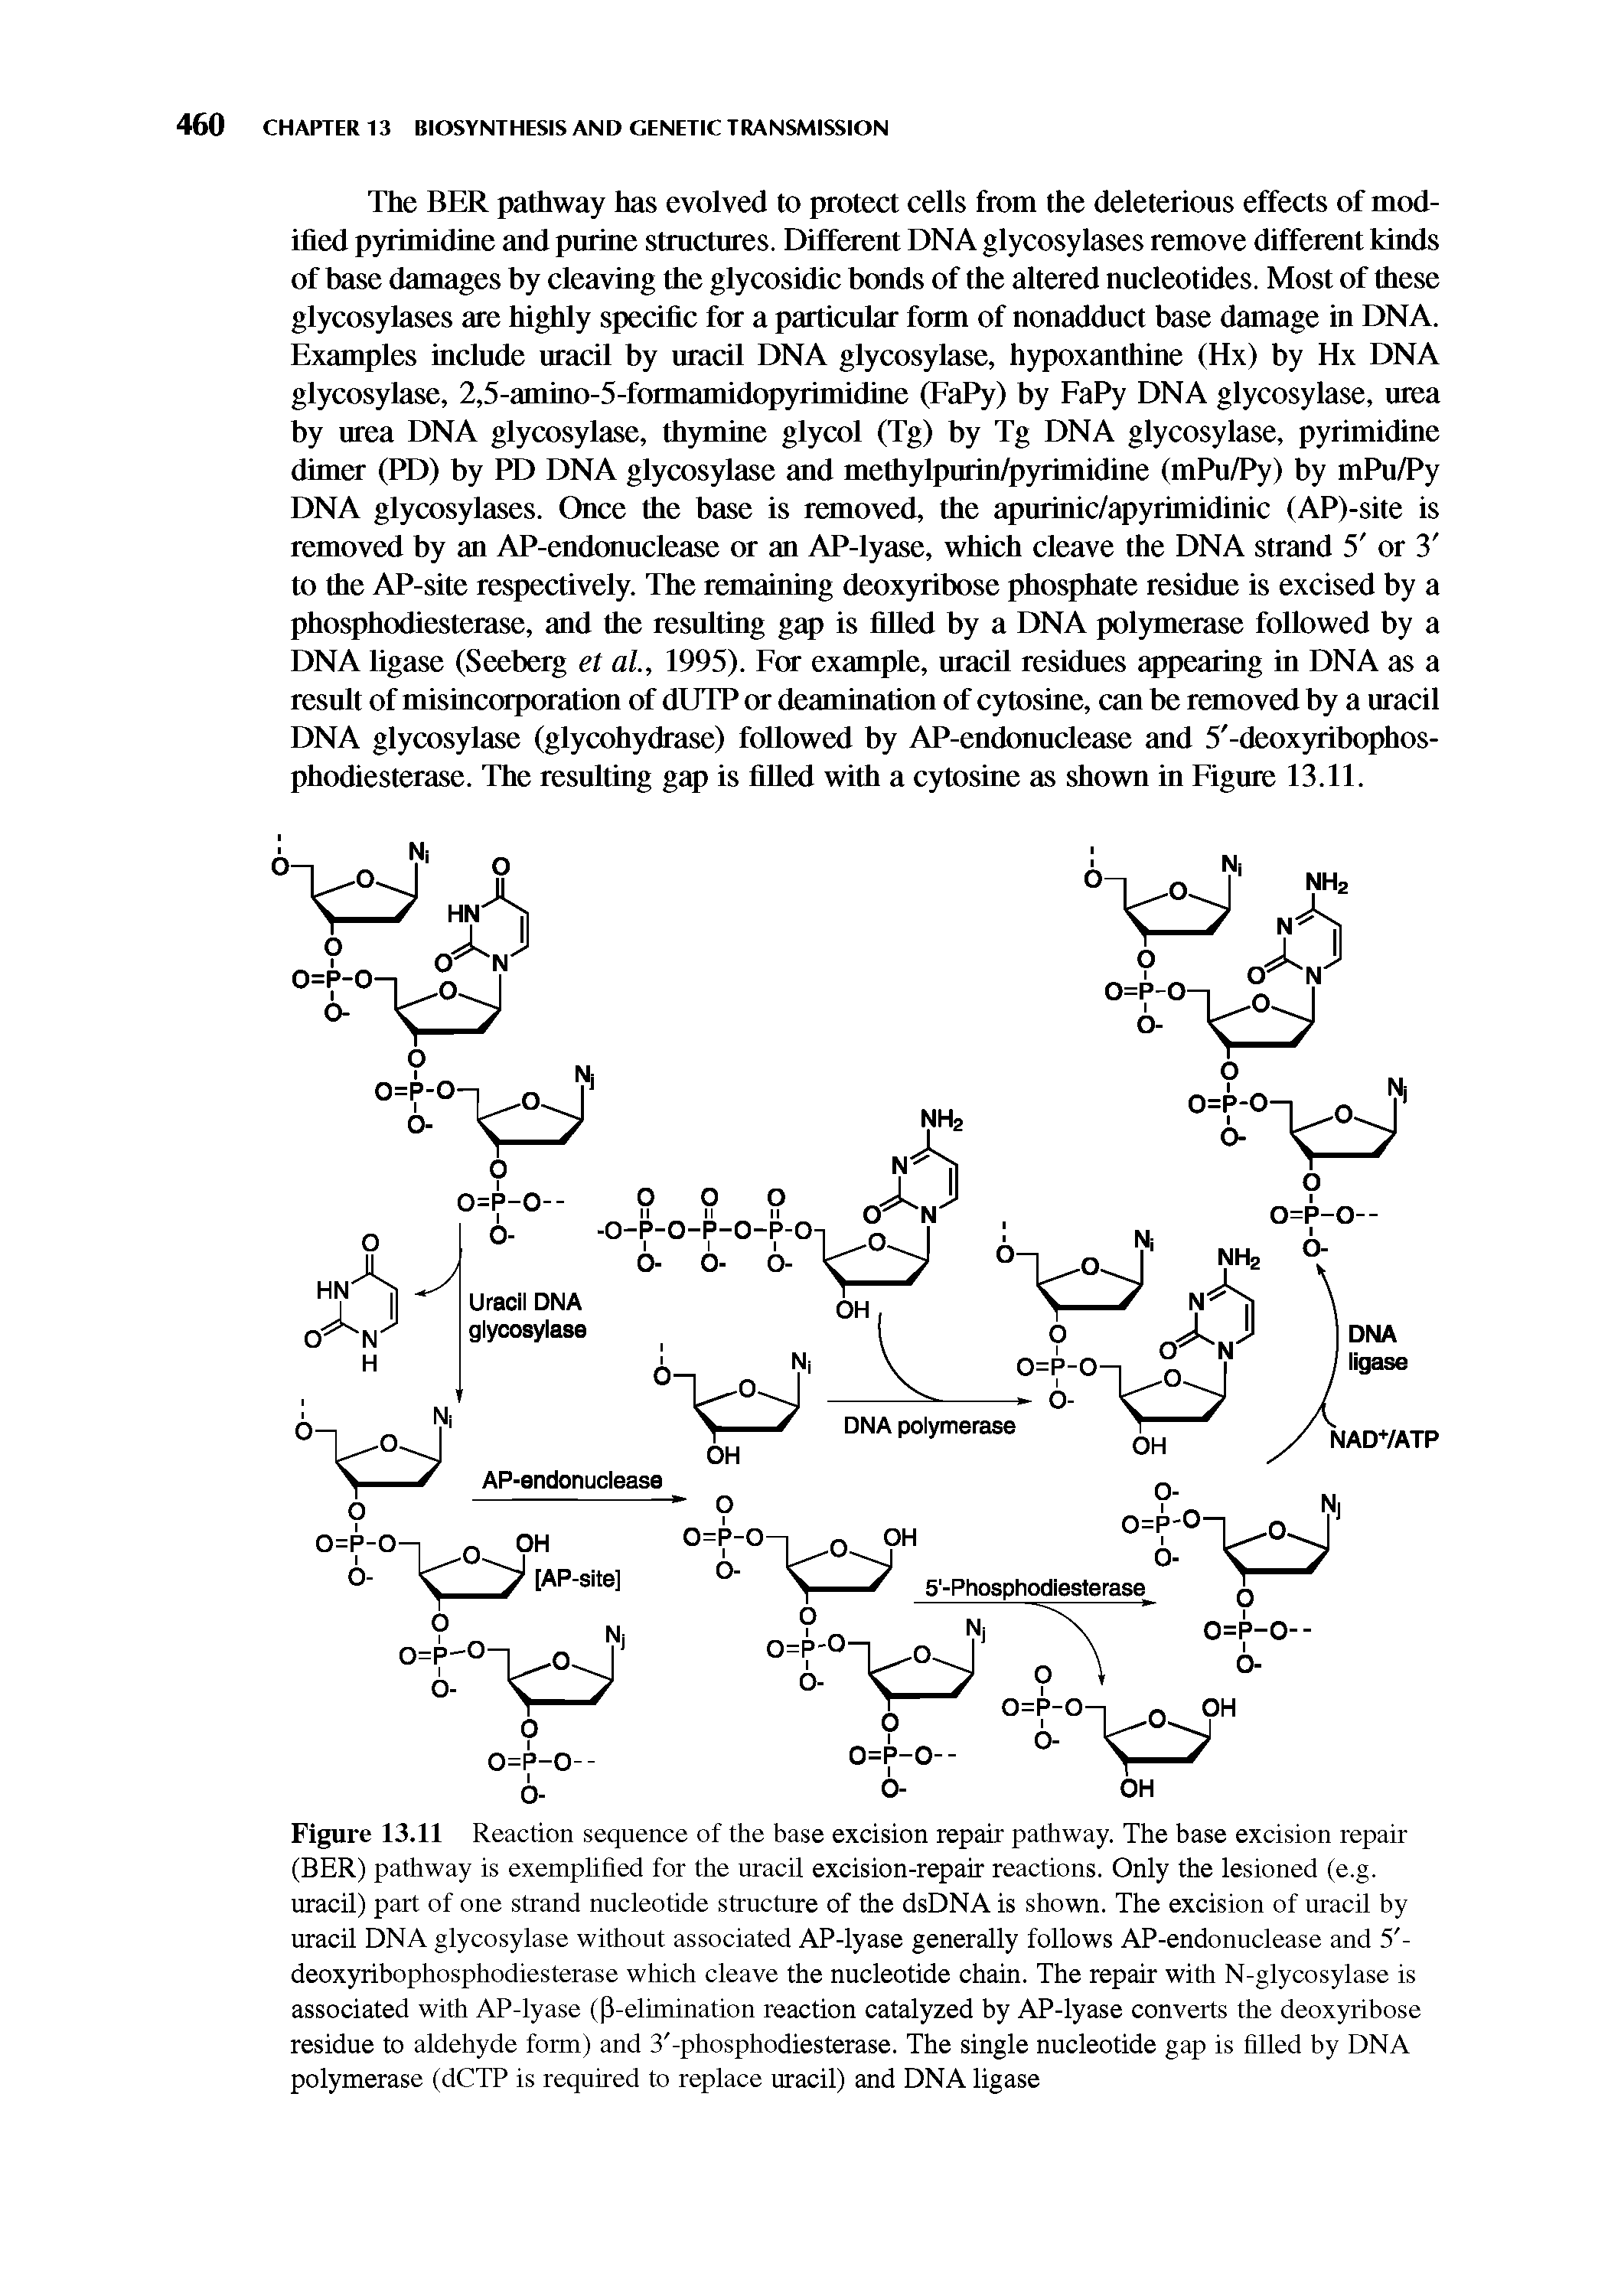 Figure 13.11 Reaction sequence of the base excision repair pathway. The base excision repair (BER) pathway is exemplified for the uracil excision-repair reactions. Only the lesioned (e.g. uracil) part of one strand nucleotide structure of the dsDNA is shown. The excision of uracil by uracil DNA glycosylase without associated AP-lyase generally follows AP-endonuclease and 5 -deoxyribophosphodiesterase which cleave the nucleotide chain. The repair with N-glycosylase is associated with AP-lyase (P-elimination reaction catalyzed by AP-lyase converts the deoxyribose residue to aldehyde form) and 3 -phosphodiesterase. The single nucleotide gap is filled by DNA polymerase (dCTP is required to replace uracil) and DNA ligase...